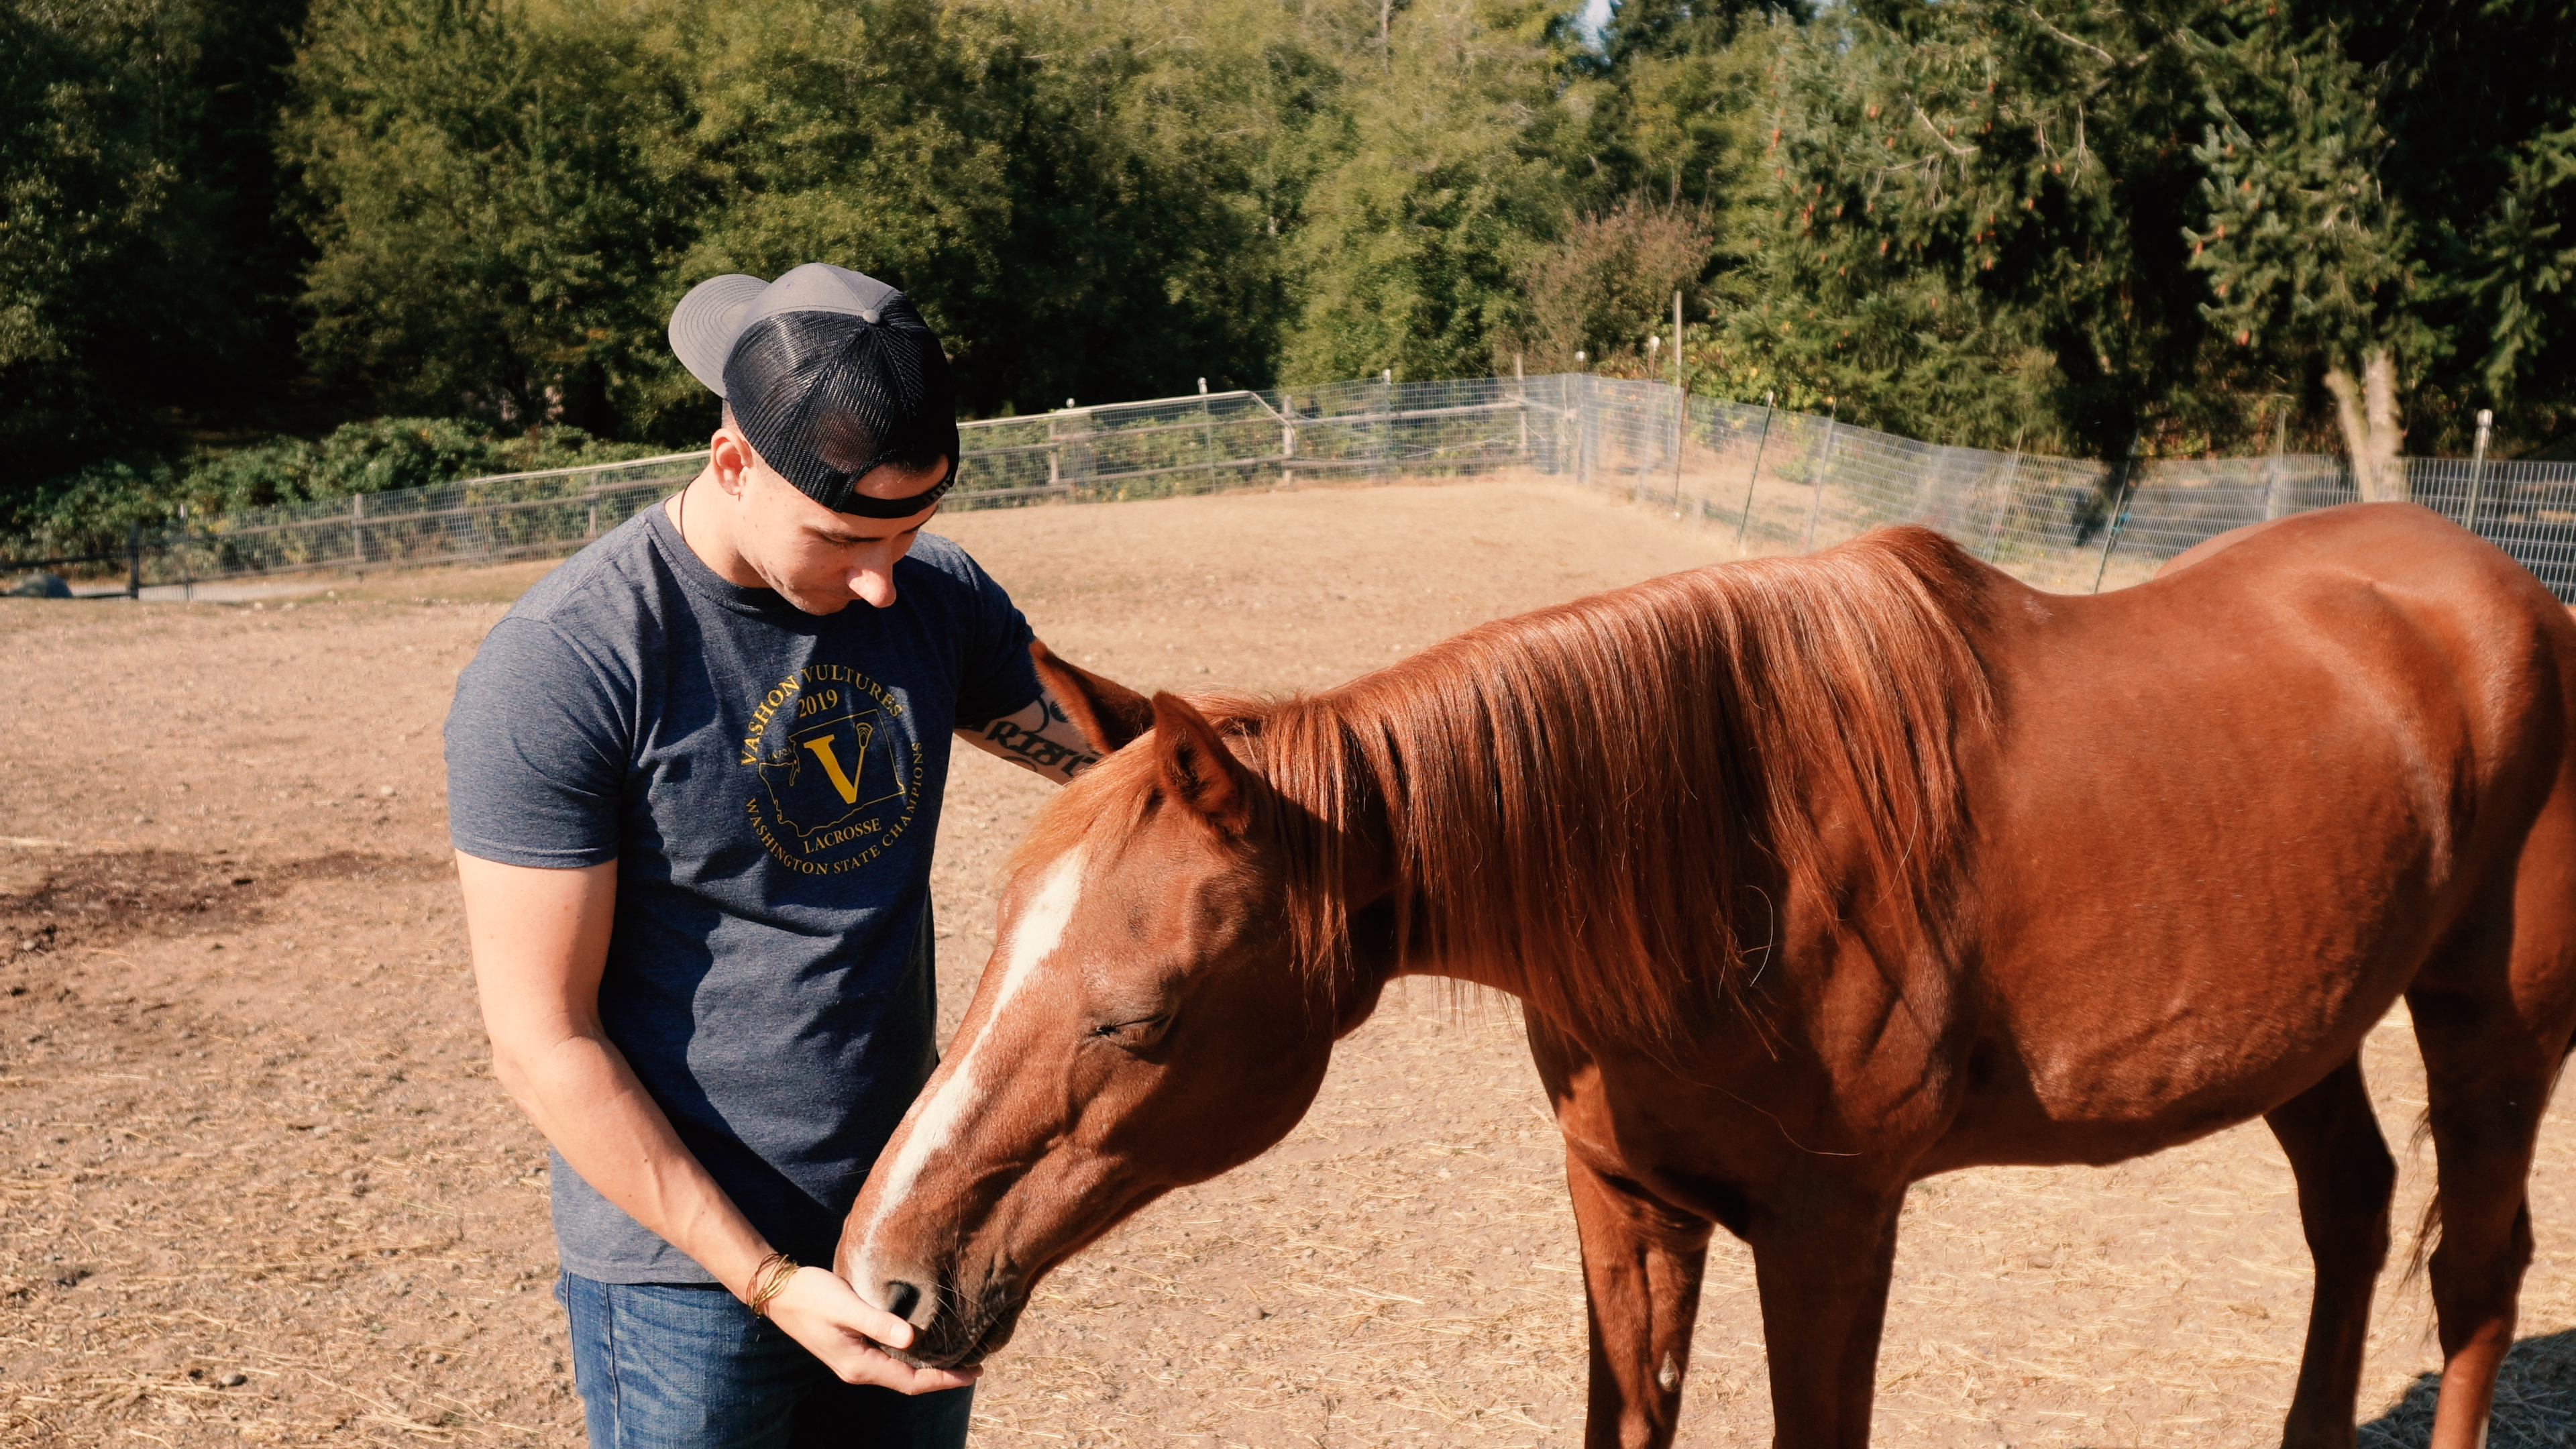 Headley Holistics Co-Founder, Tristan, Sharing a sweet and tender moment with one of the rescue horses on their farm, Ranger.